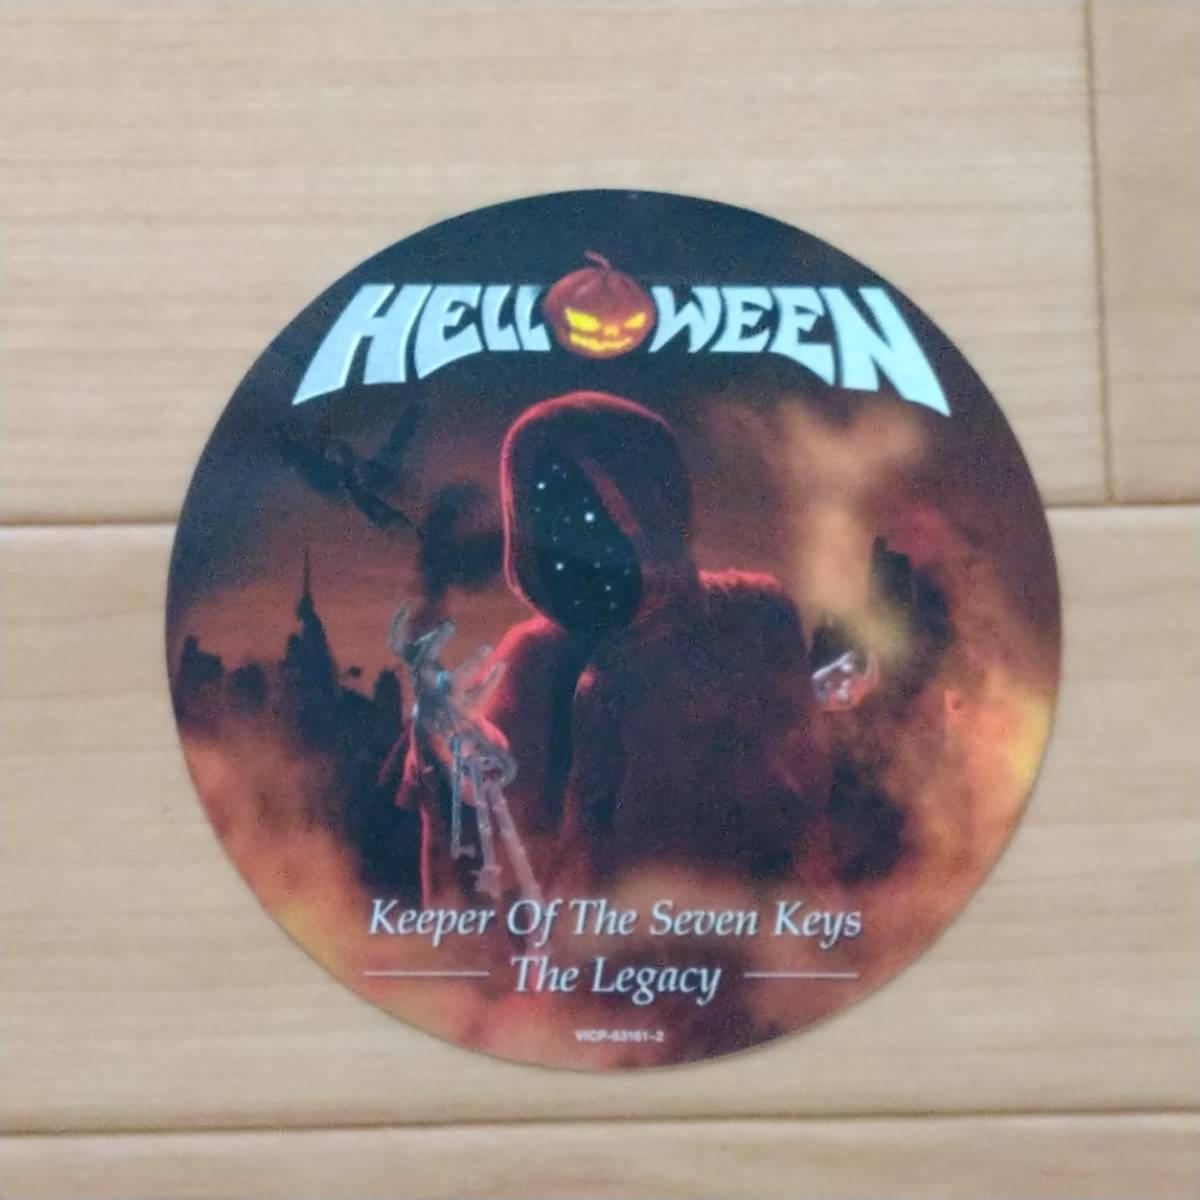 HELLOWEEN / KEEPER OF THE SEVEN KEYS - THE LEGACY - 2CD domestic record 